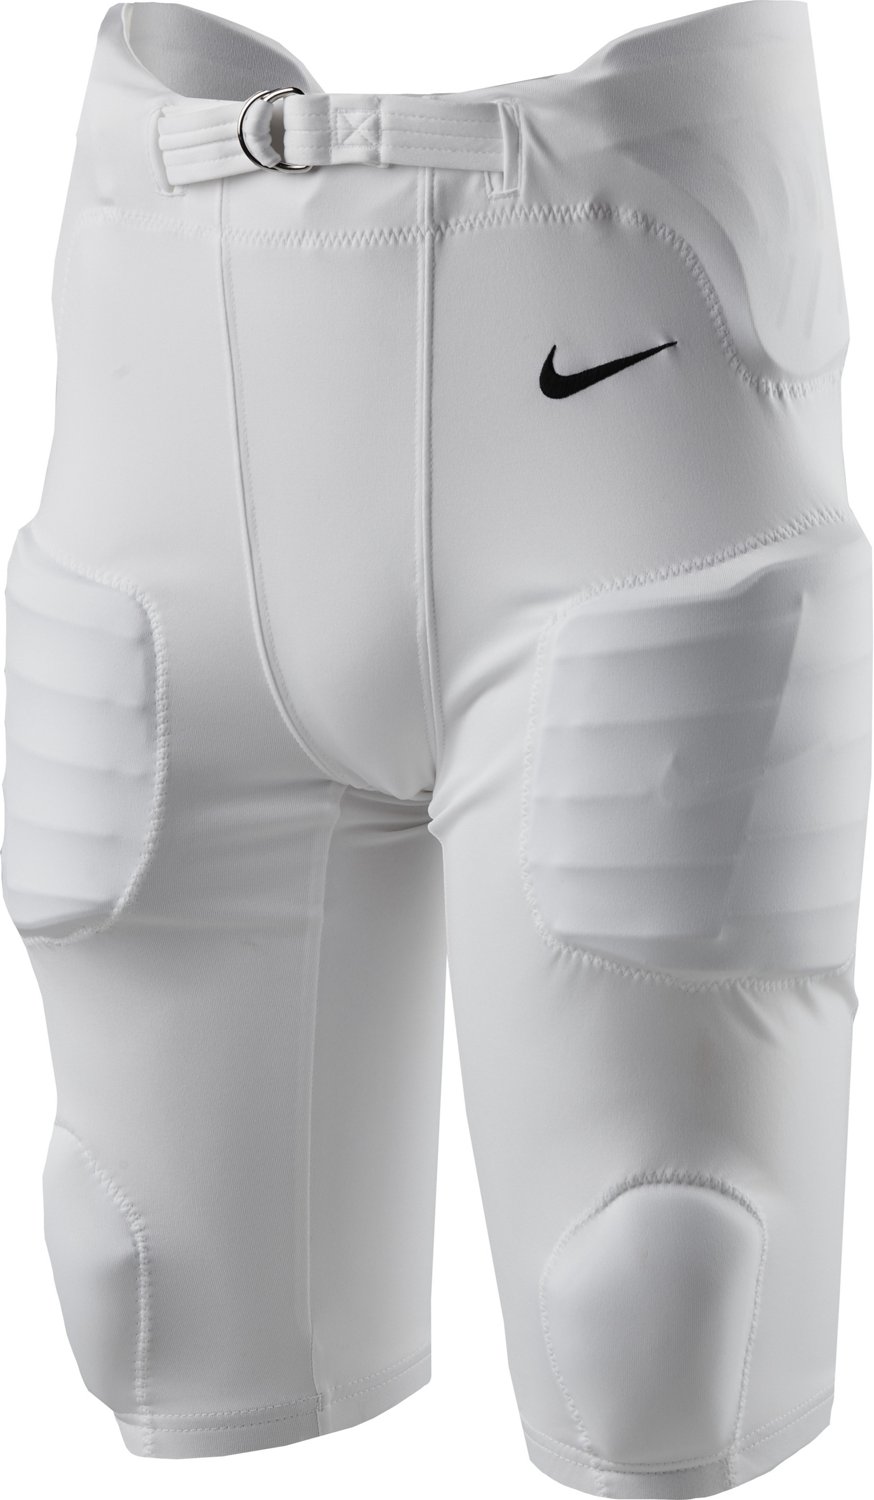 Nike Youth Pants Discount, SAVE 54% - aveclumiere.com